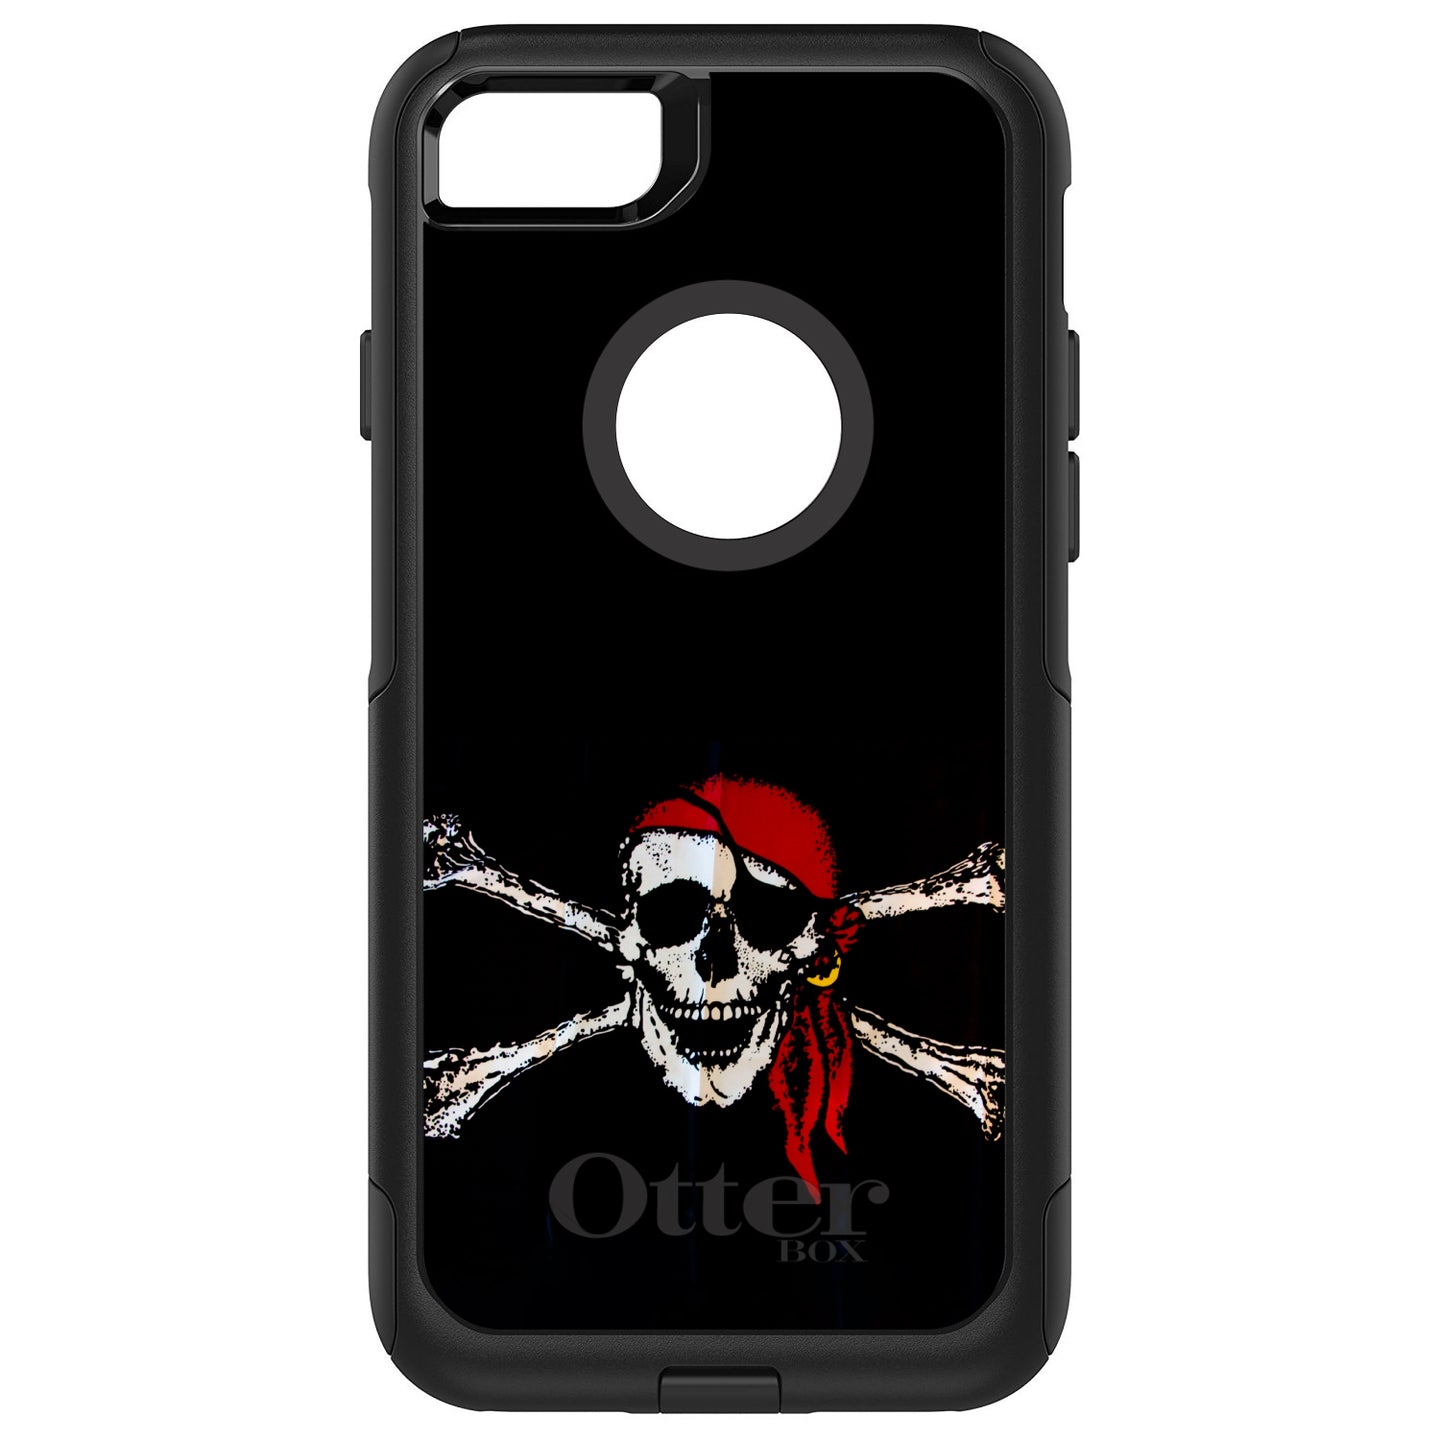 DistinctInk™ OtterBox Commuter Series Case for Apple iPhone or Samsung Galaxy - Black Red Pirate Flag